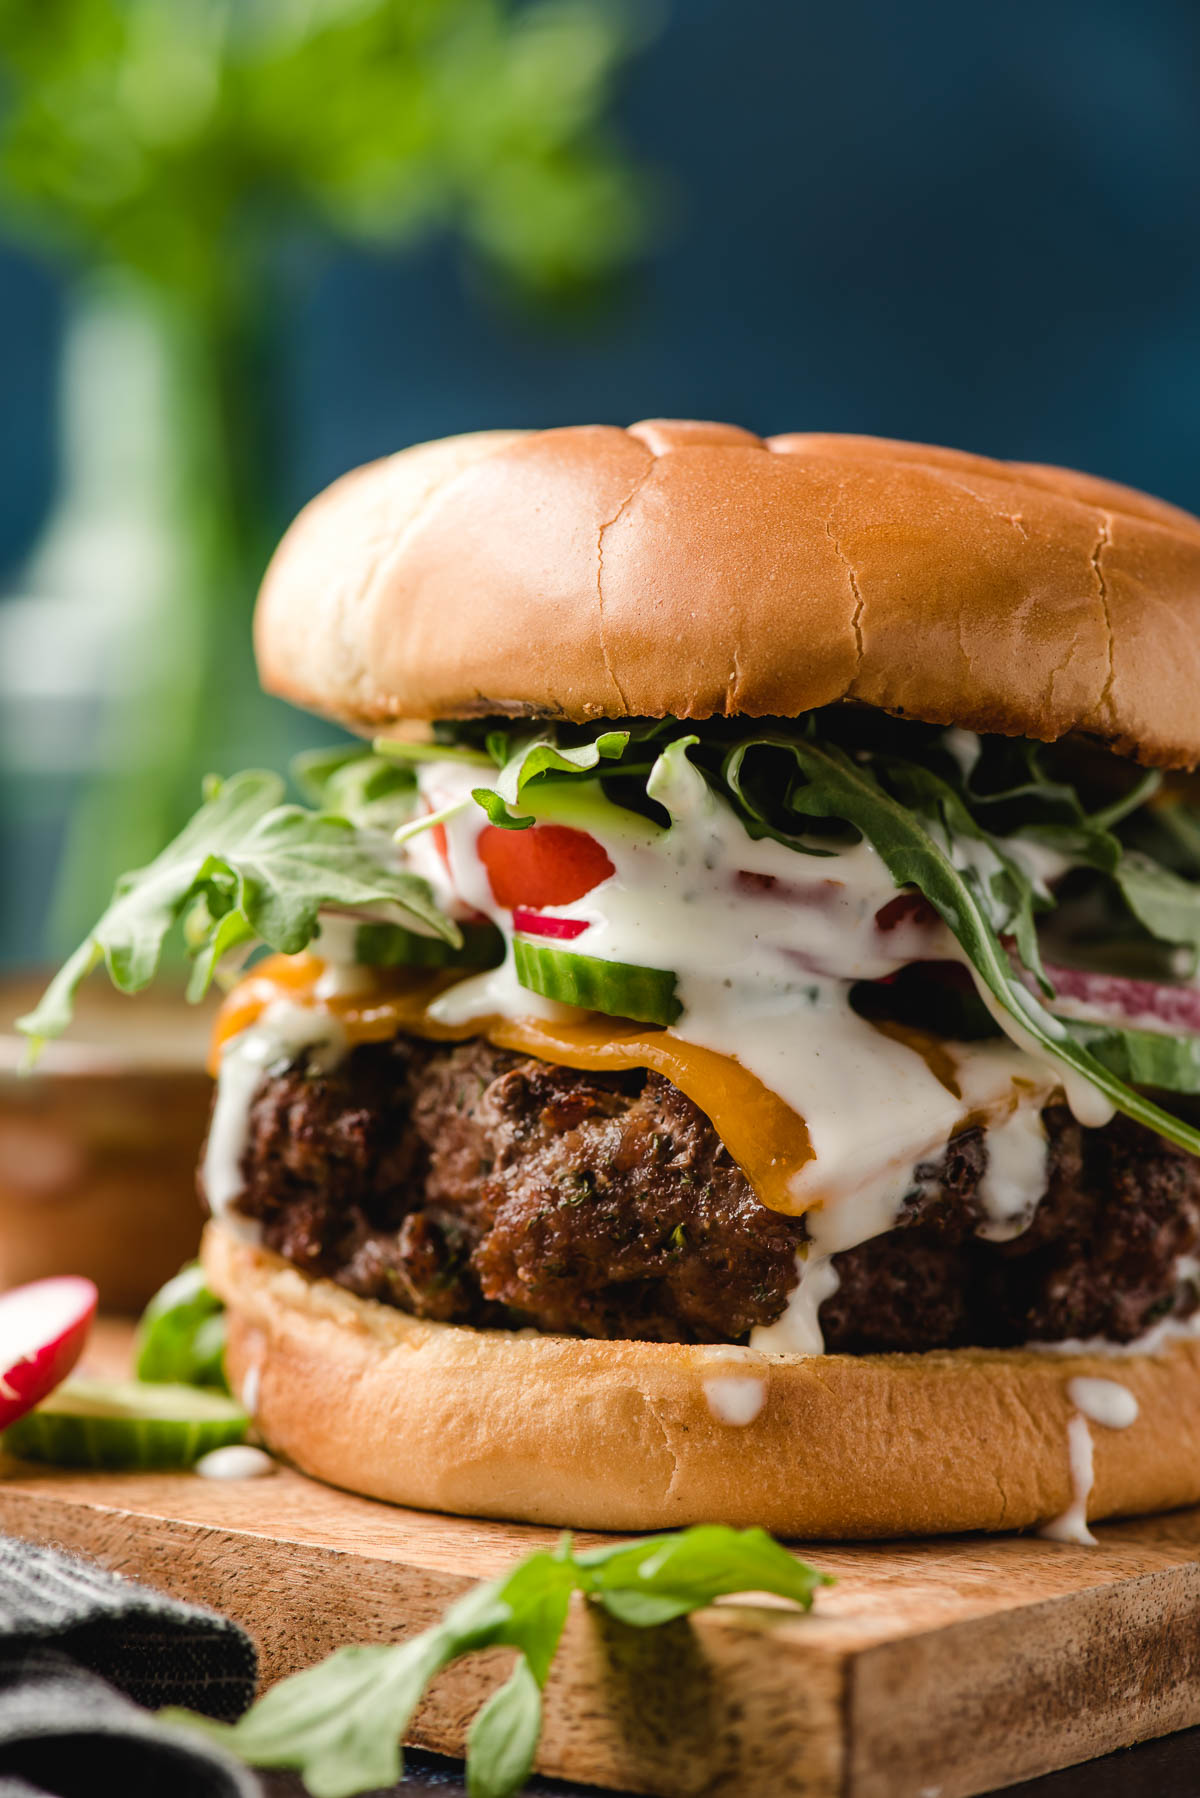 Ranch Dressing Burgers topped with cheese, tomato, and arugula shown on a brioche bun.